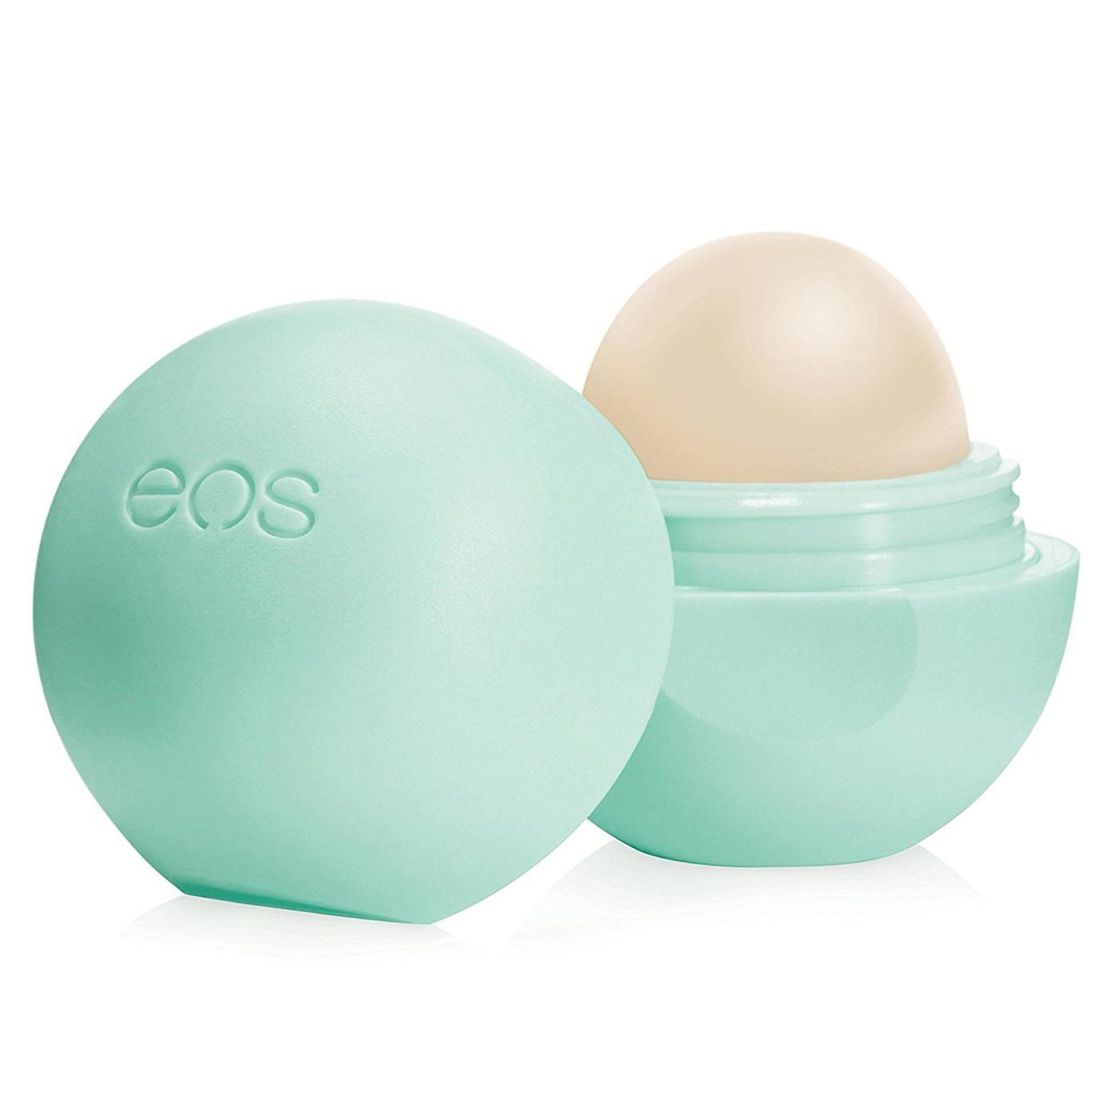 eos Lip Balm and Skin Care Products